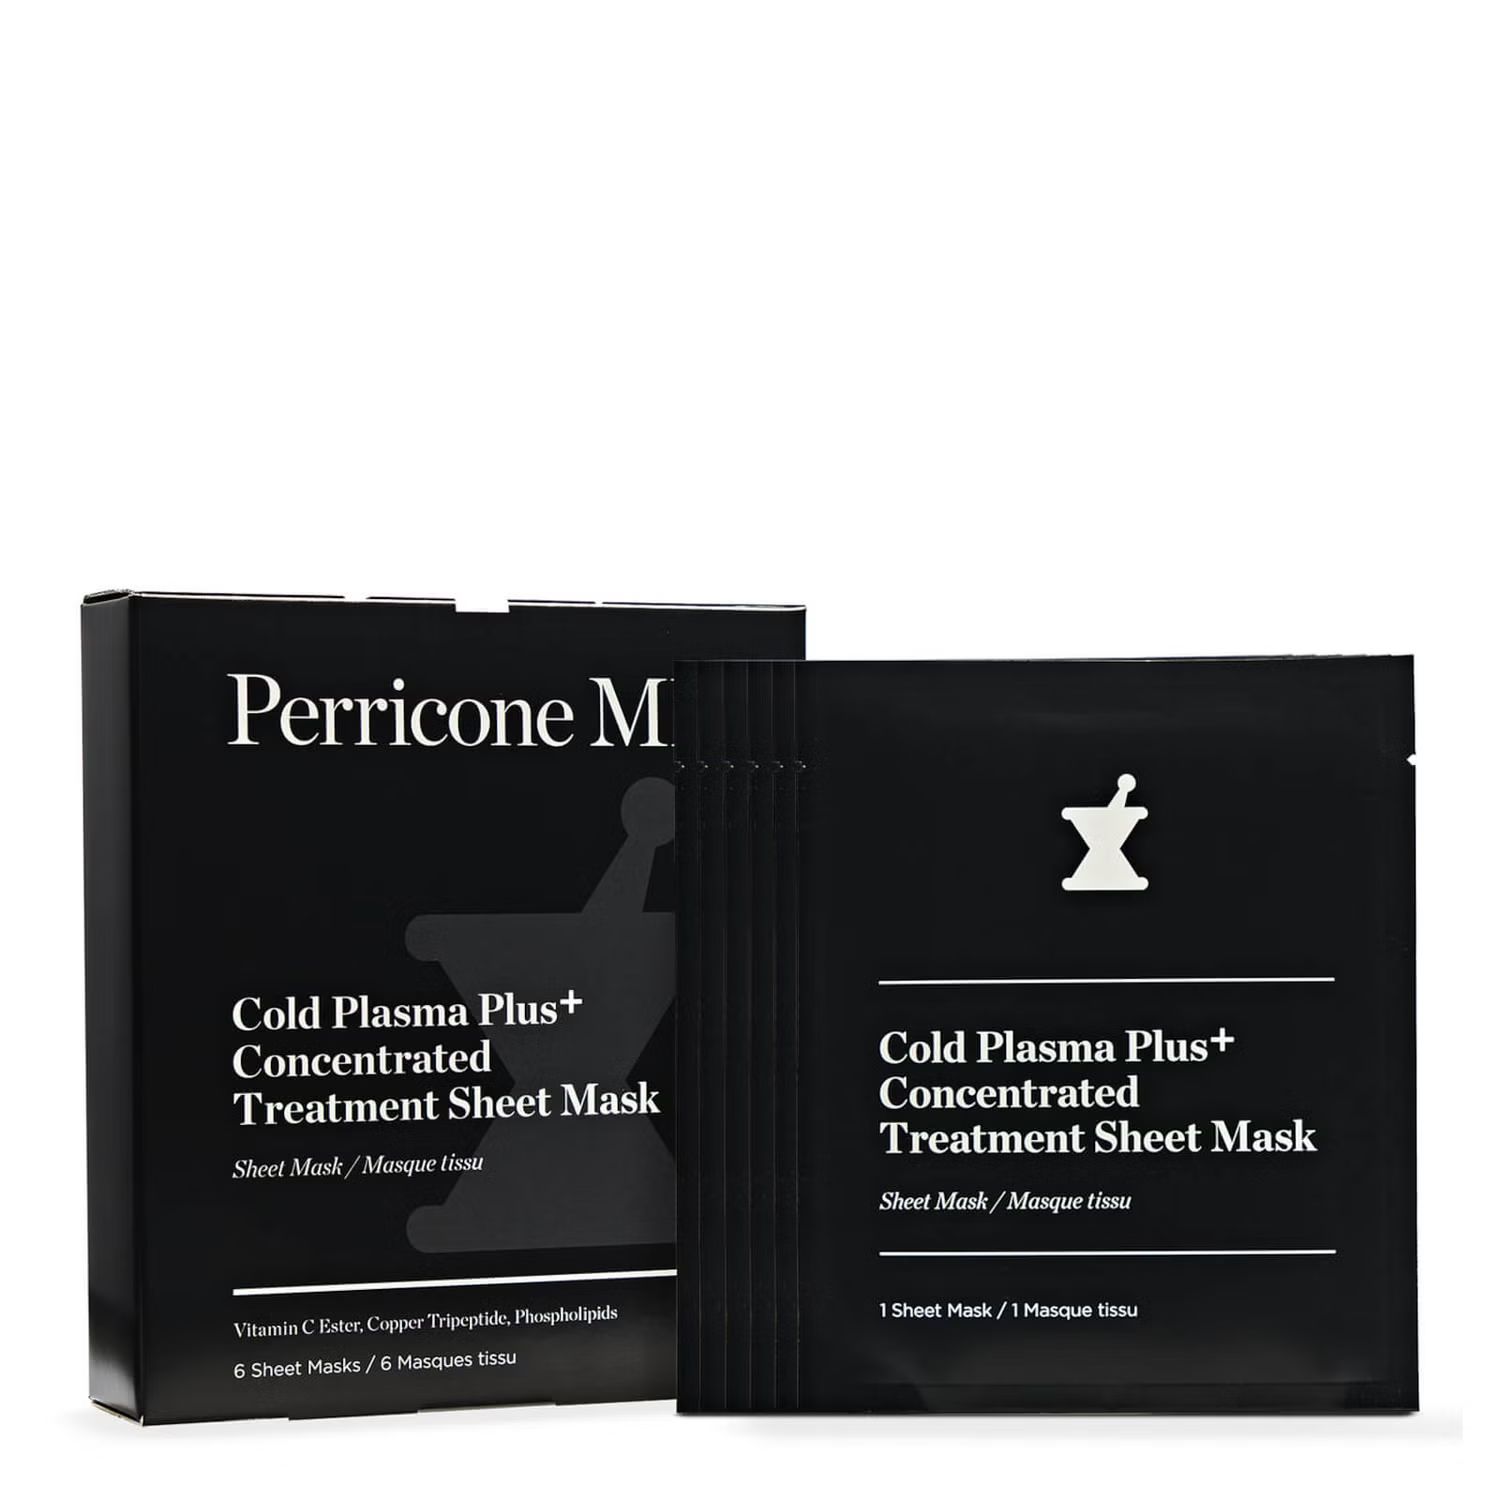 Cold Plasma Plus+ Concentrated Treatment Sheet Mask | PerriconeMD US